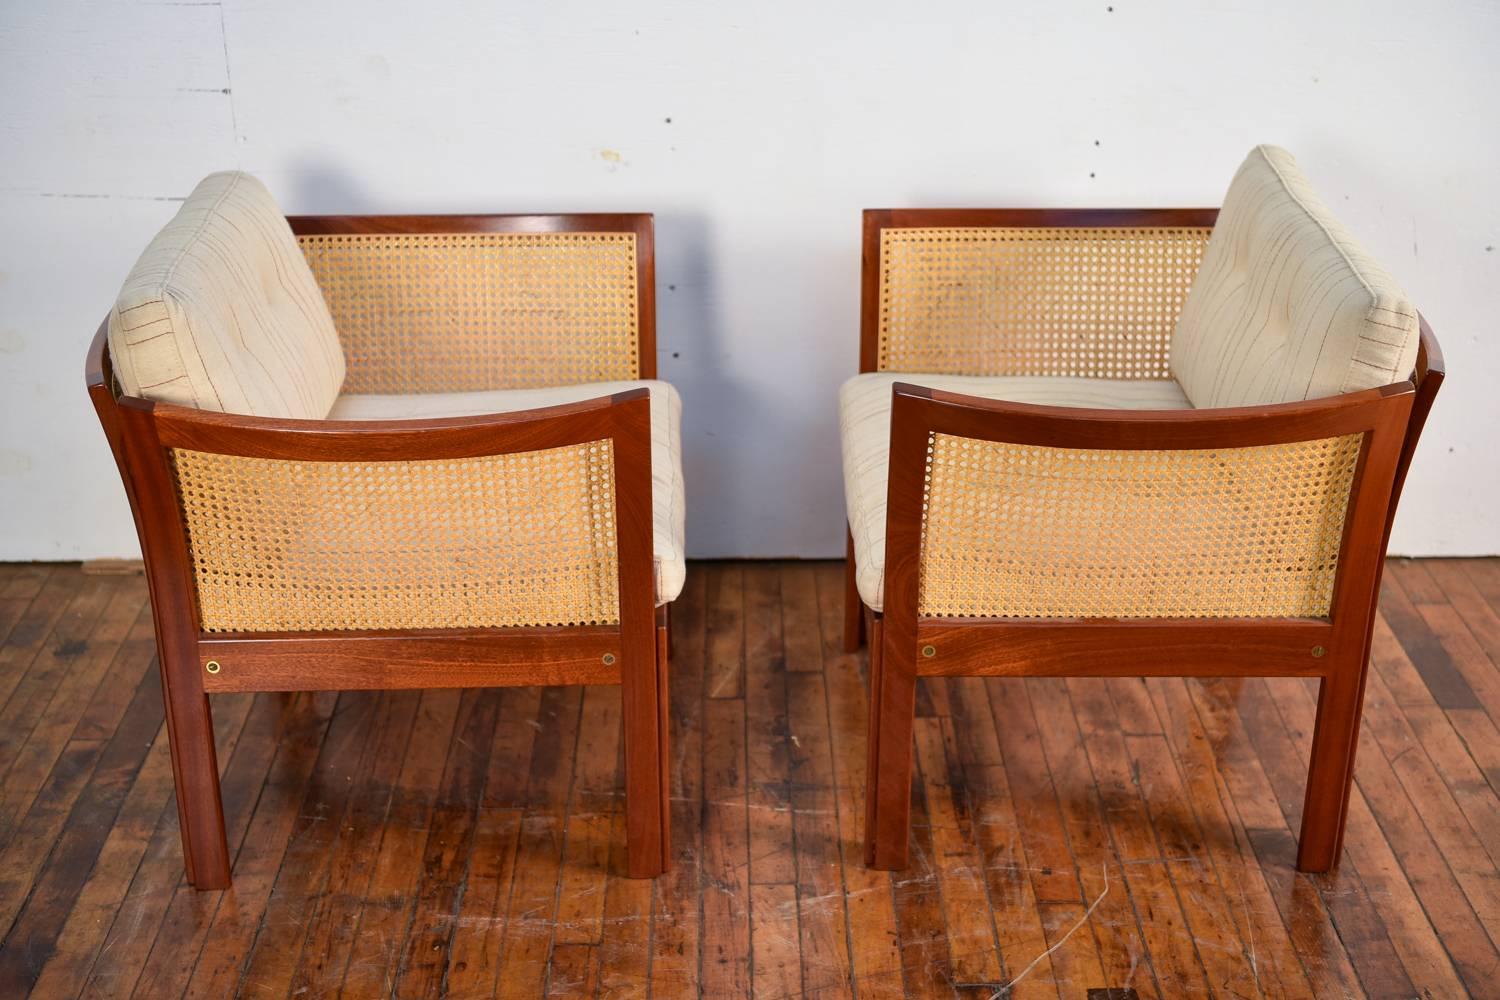 Late 20th Century Pair of Plexus Easy Chairs in Mahogany by Illum Wikkelsø for C. F. Christensen